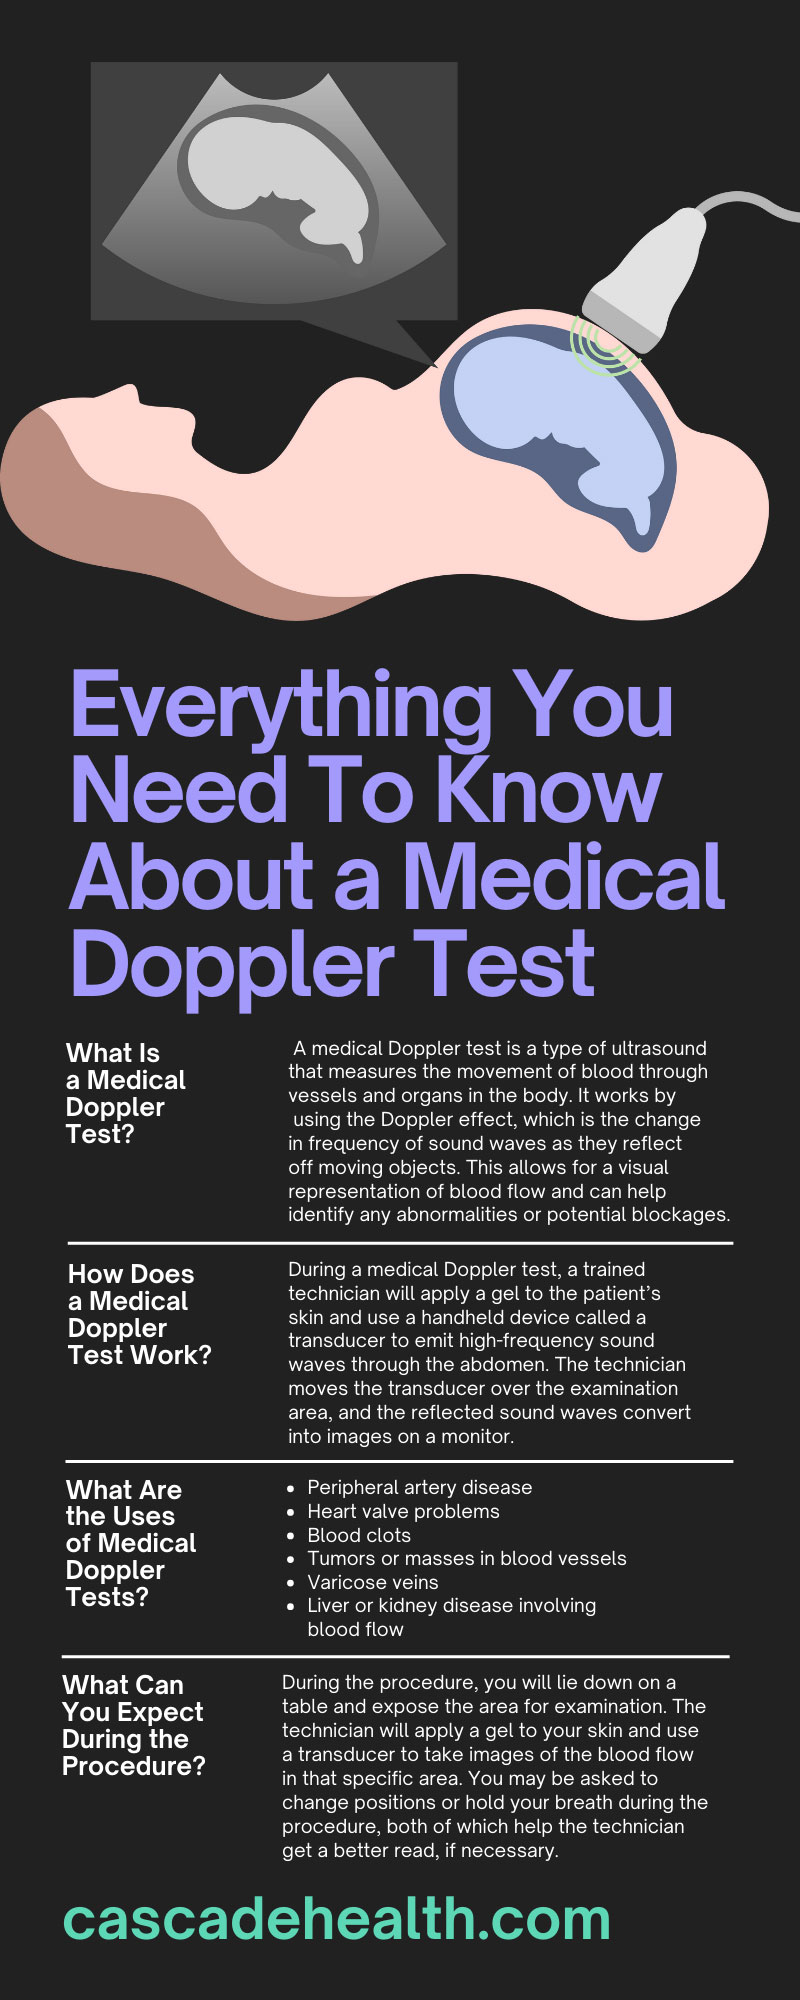 Everything You Need To Know About a Medical Doppler Test